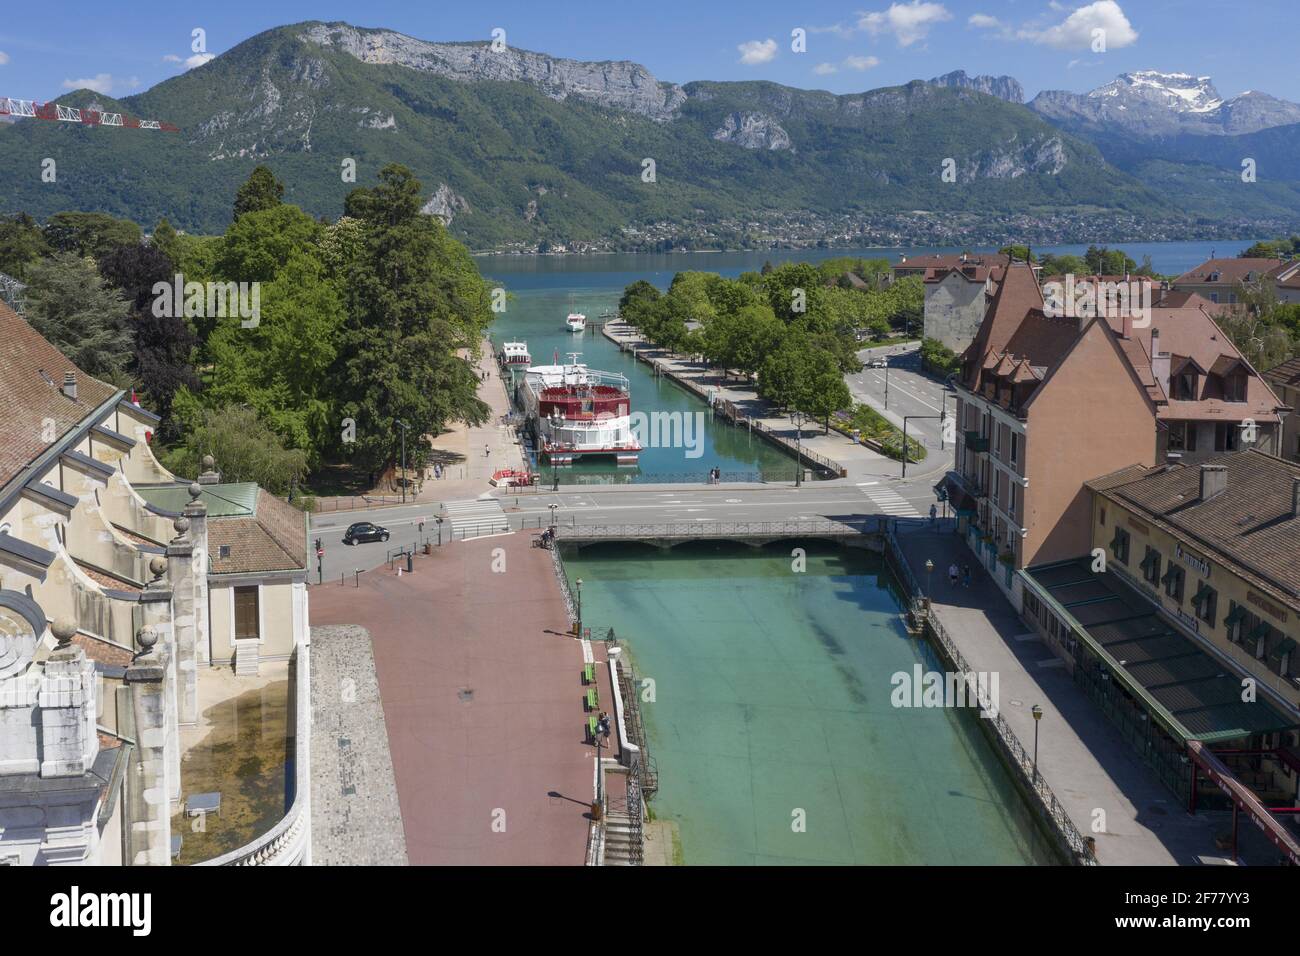 France, Haute Savoie, Annecy, the Thiou canal, and the old town (aerial view), view of the lake, Libellule boat at the quayside Stock Photo